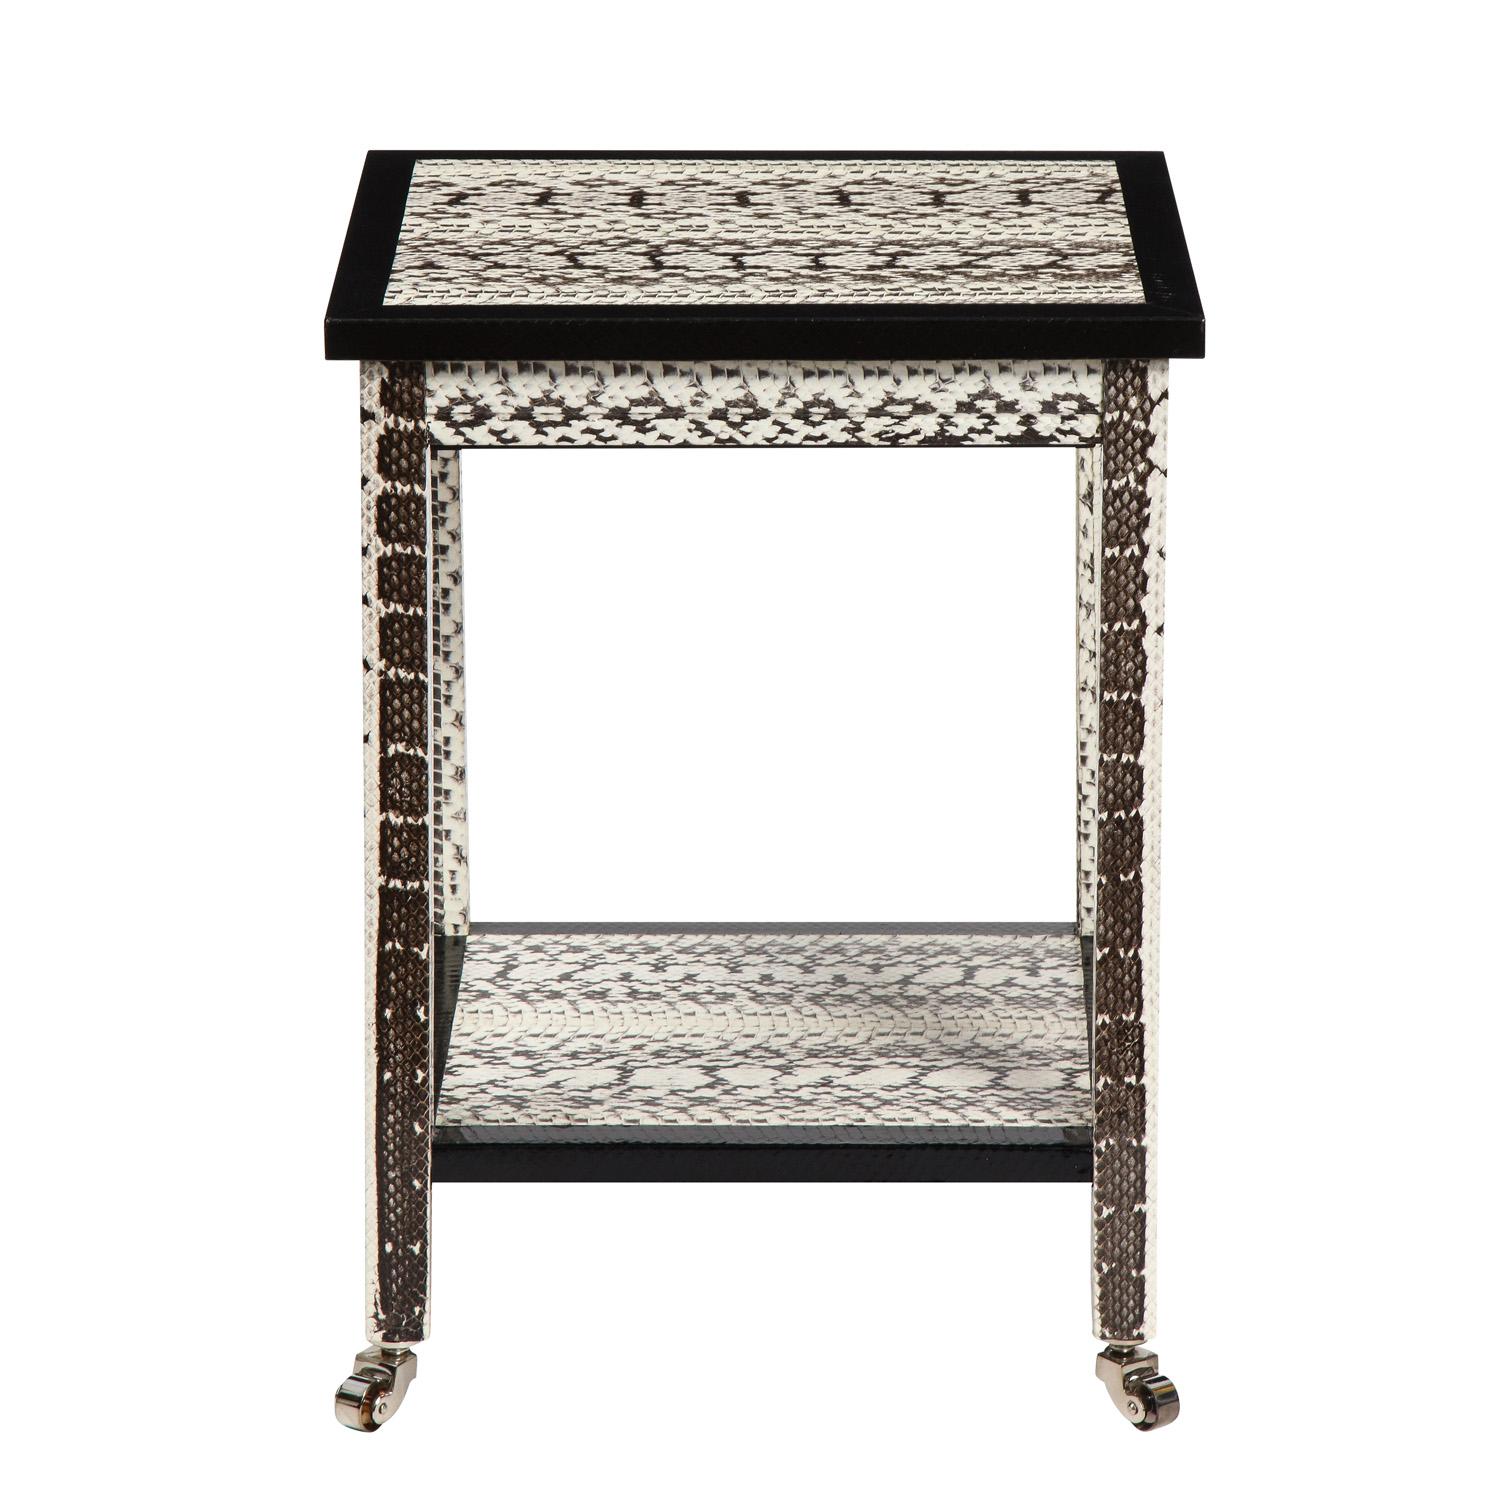 Pair of 2-tier side tables in black and white snake skin on chrome castors by Evan Lobel for Lobel Originals, American 2021. These table are meticulously crafted in beautiful skins.
 